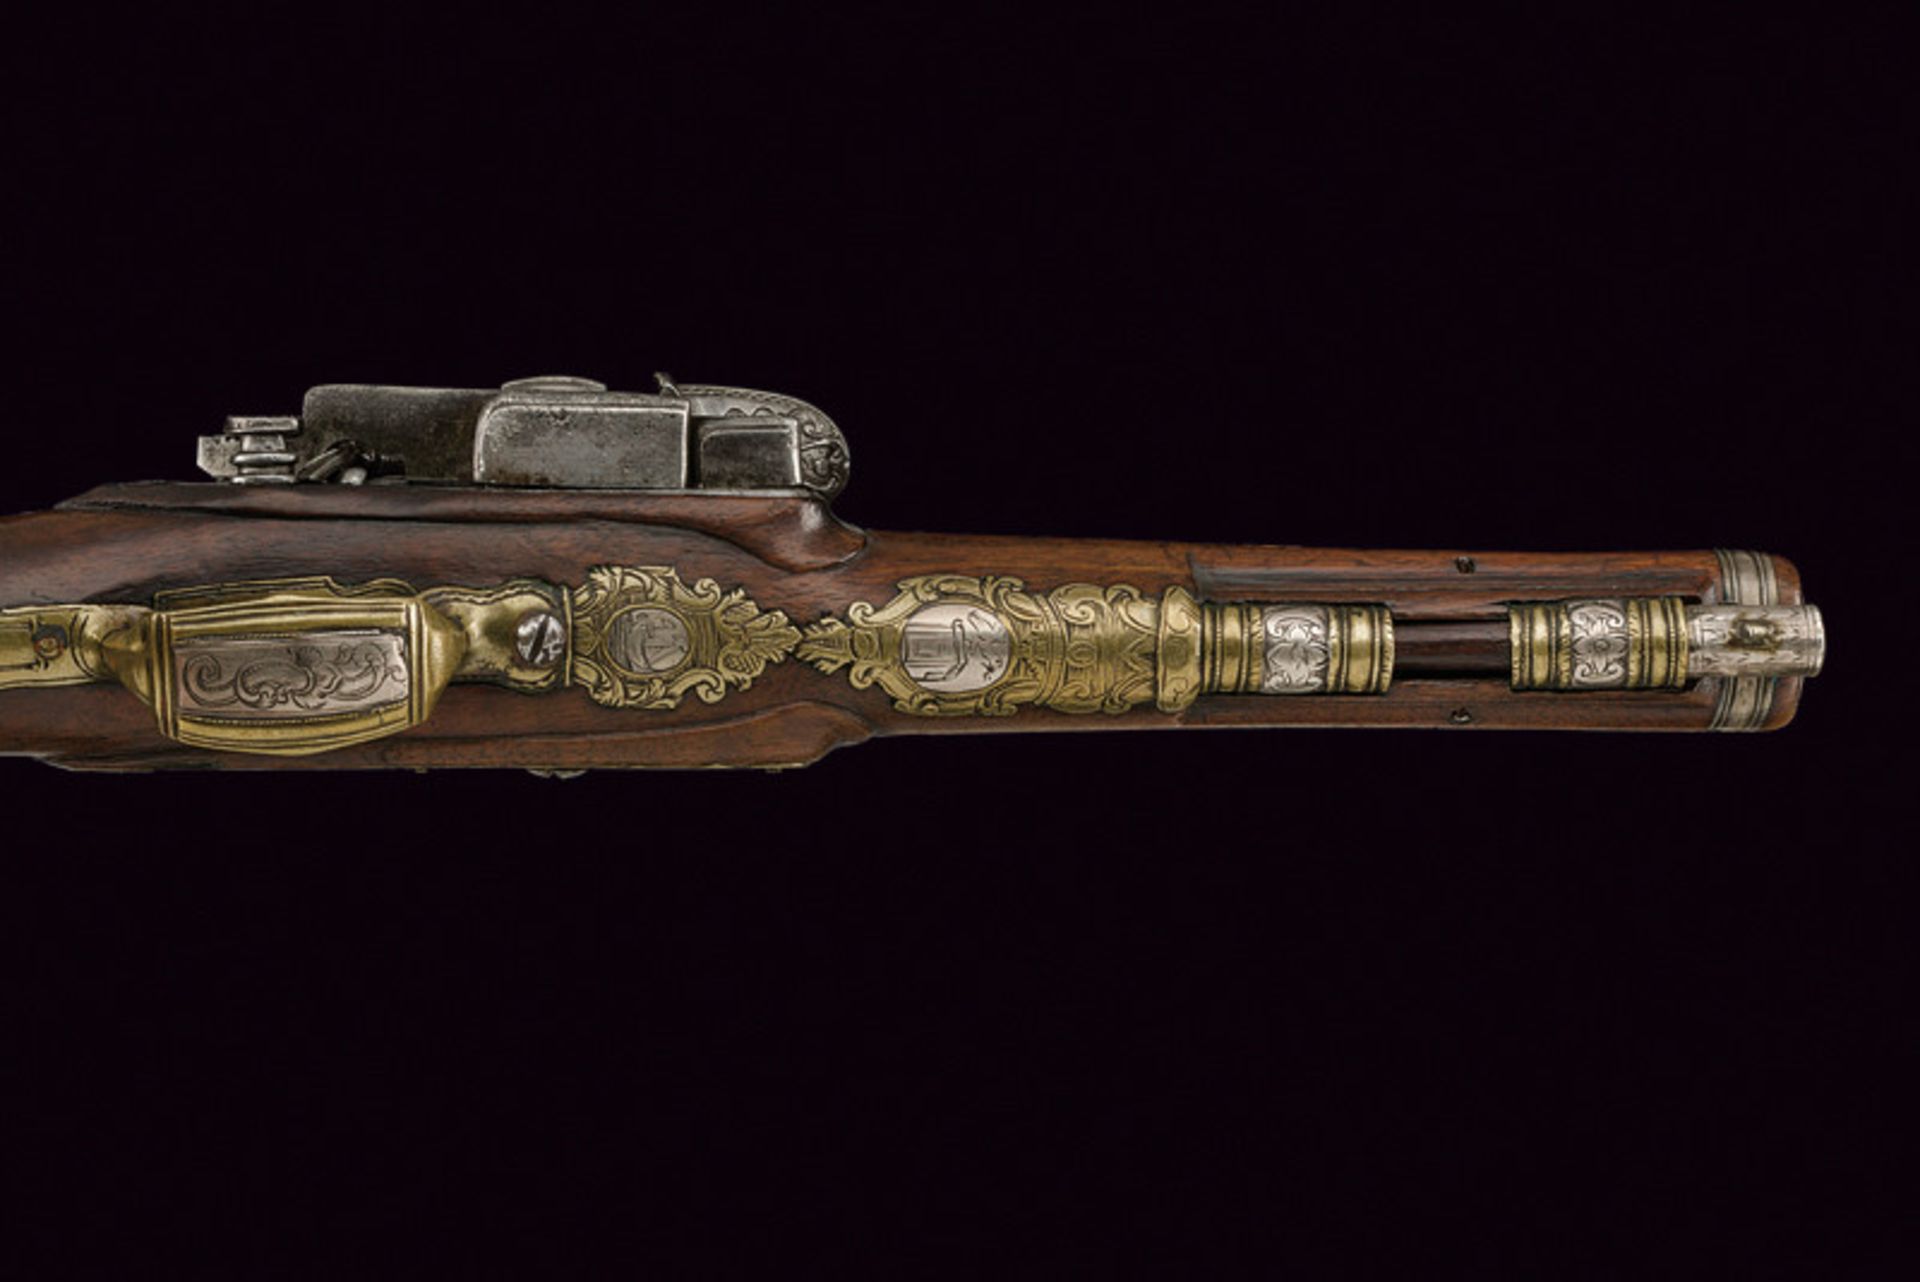 A beautiful miquelet flintlock pistol dating: 18th Century provenance: Southern Italy Smooth, two- - Image 9 of 10